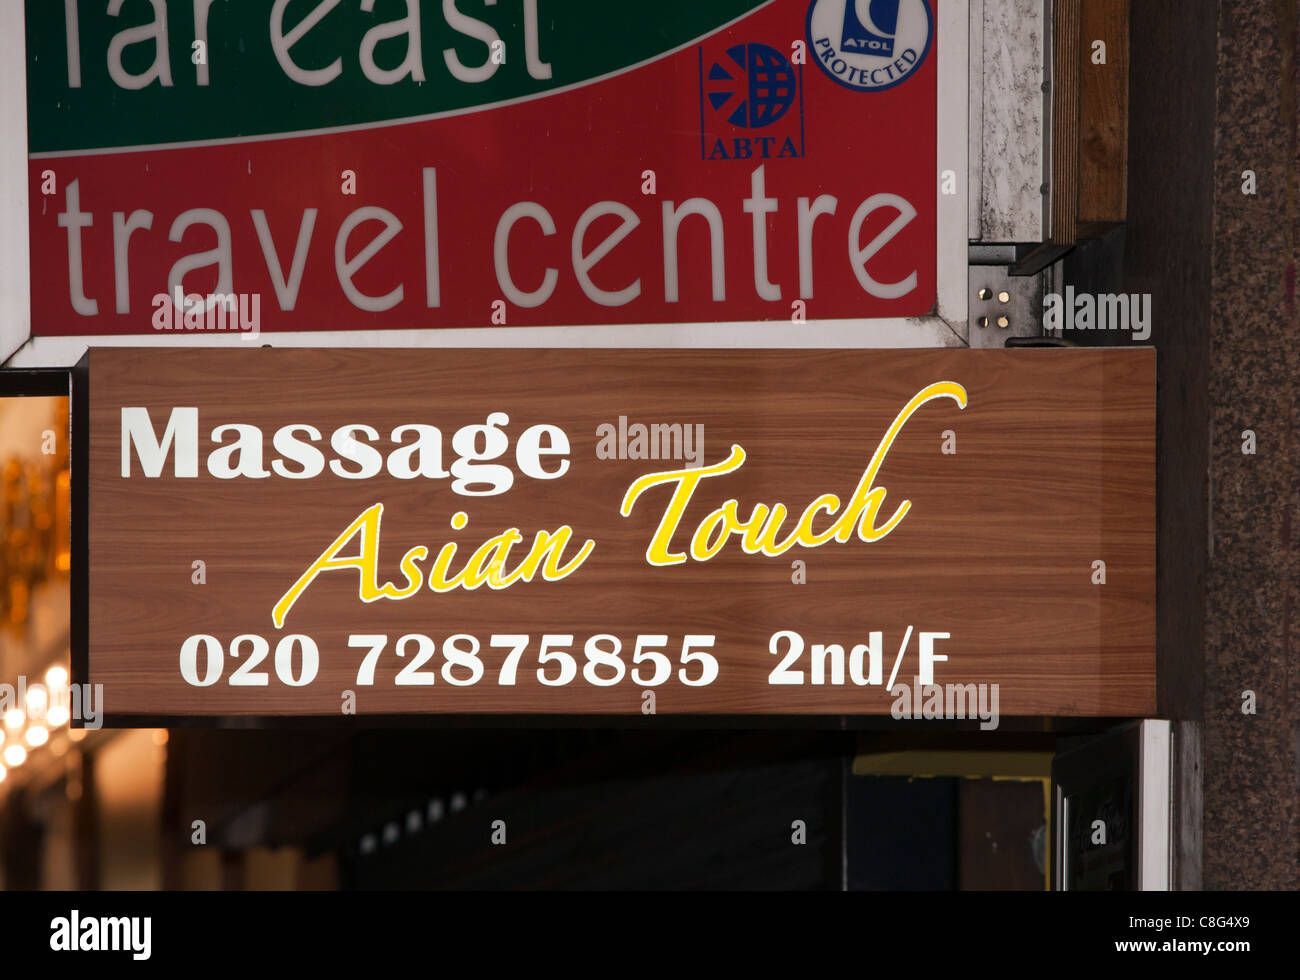 Asian Touch Massage and travel centre. signs, London, England, UK, Europe Stock Photo